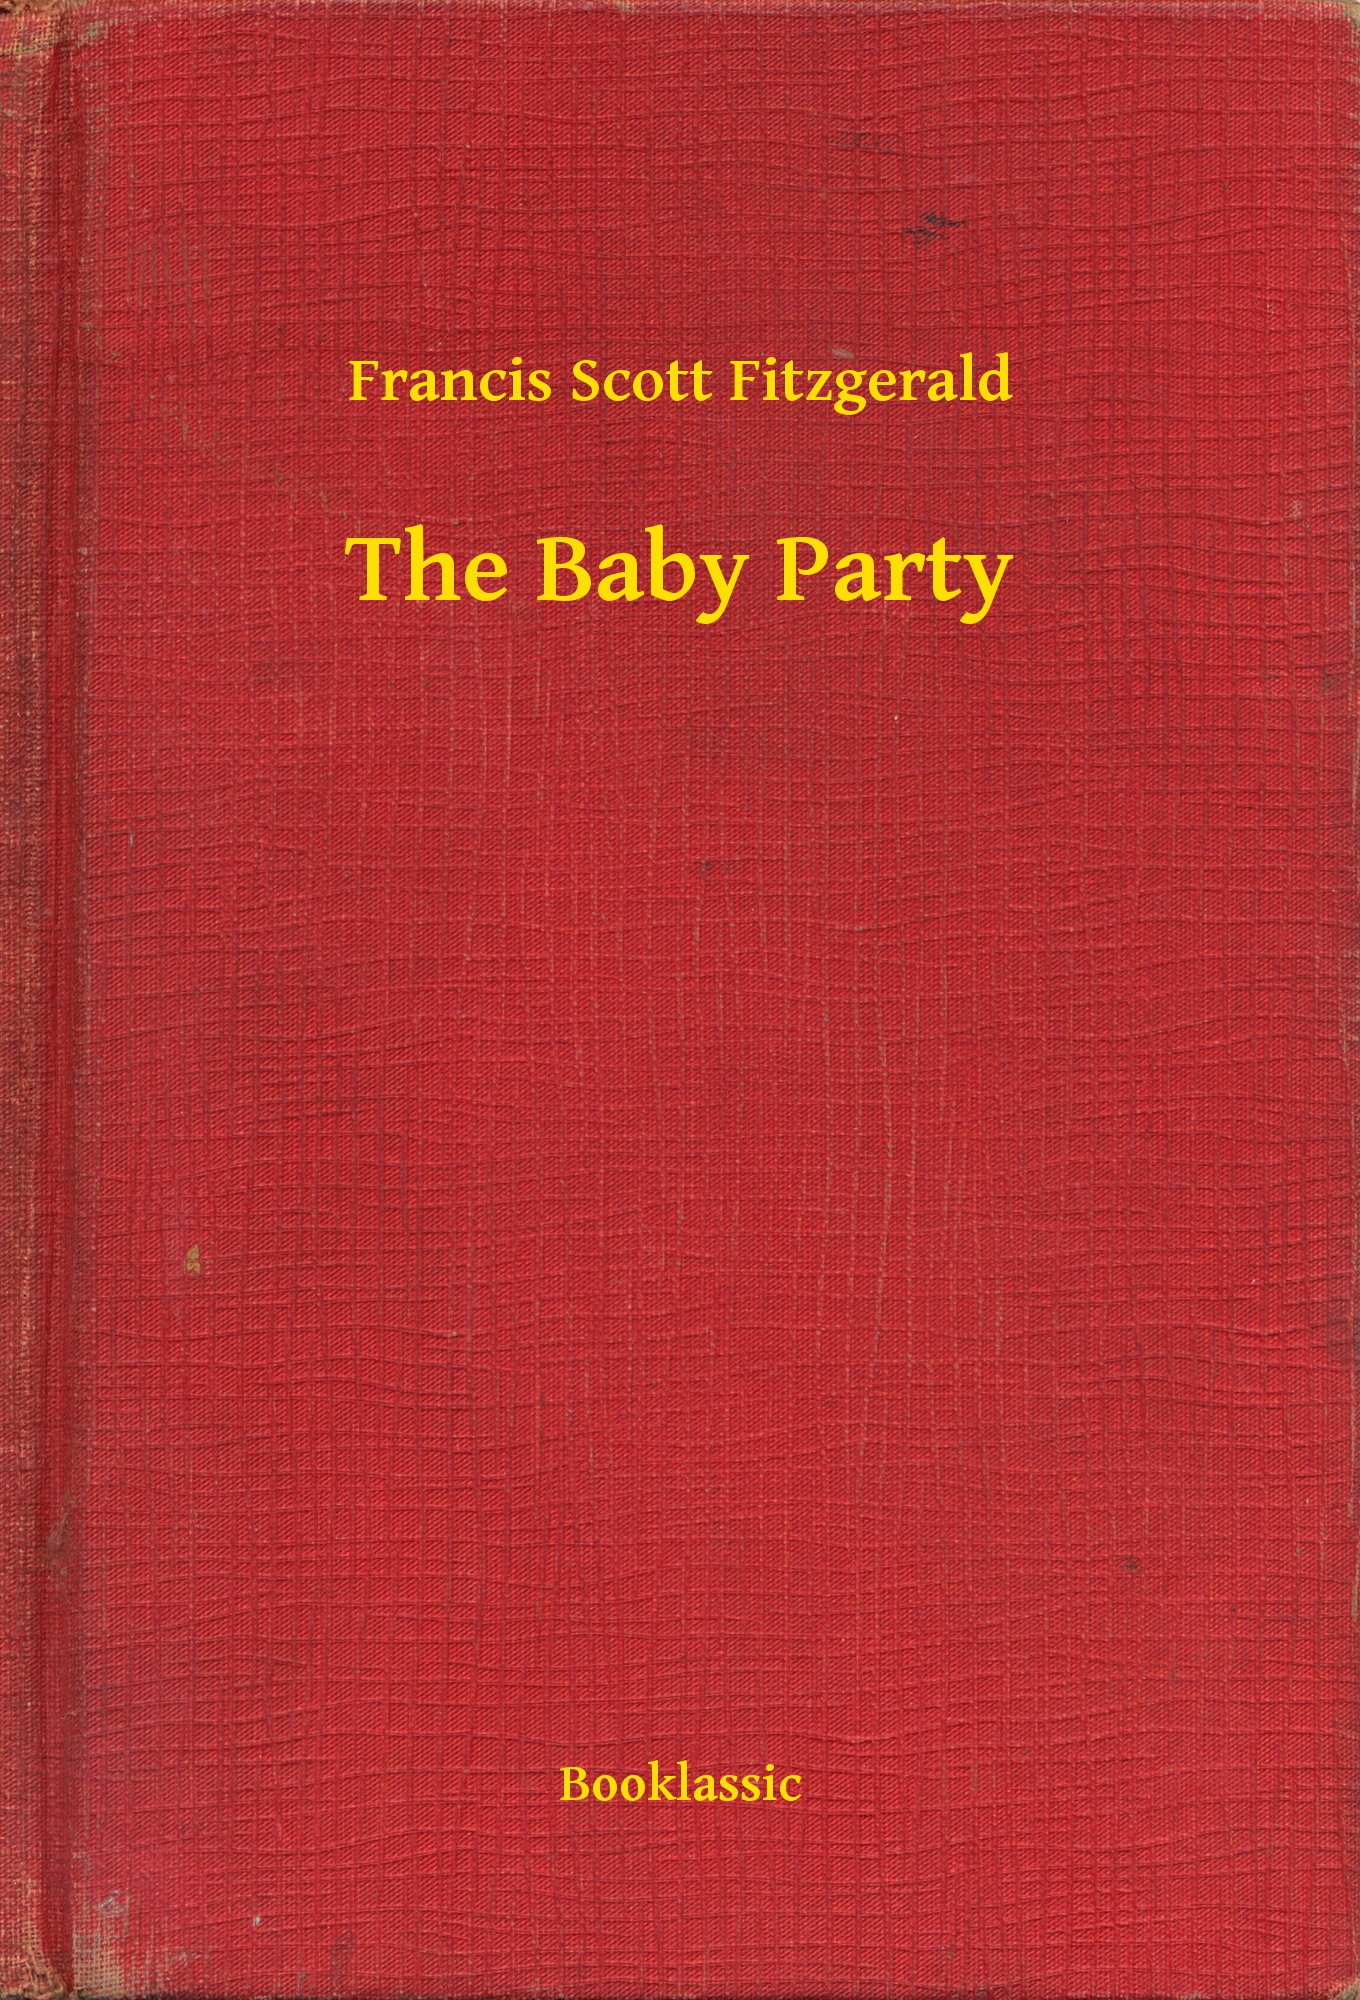 The Baby Party